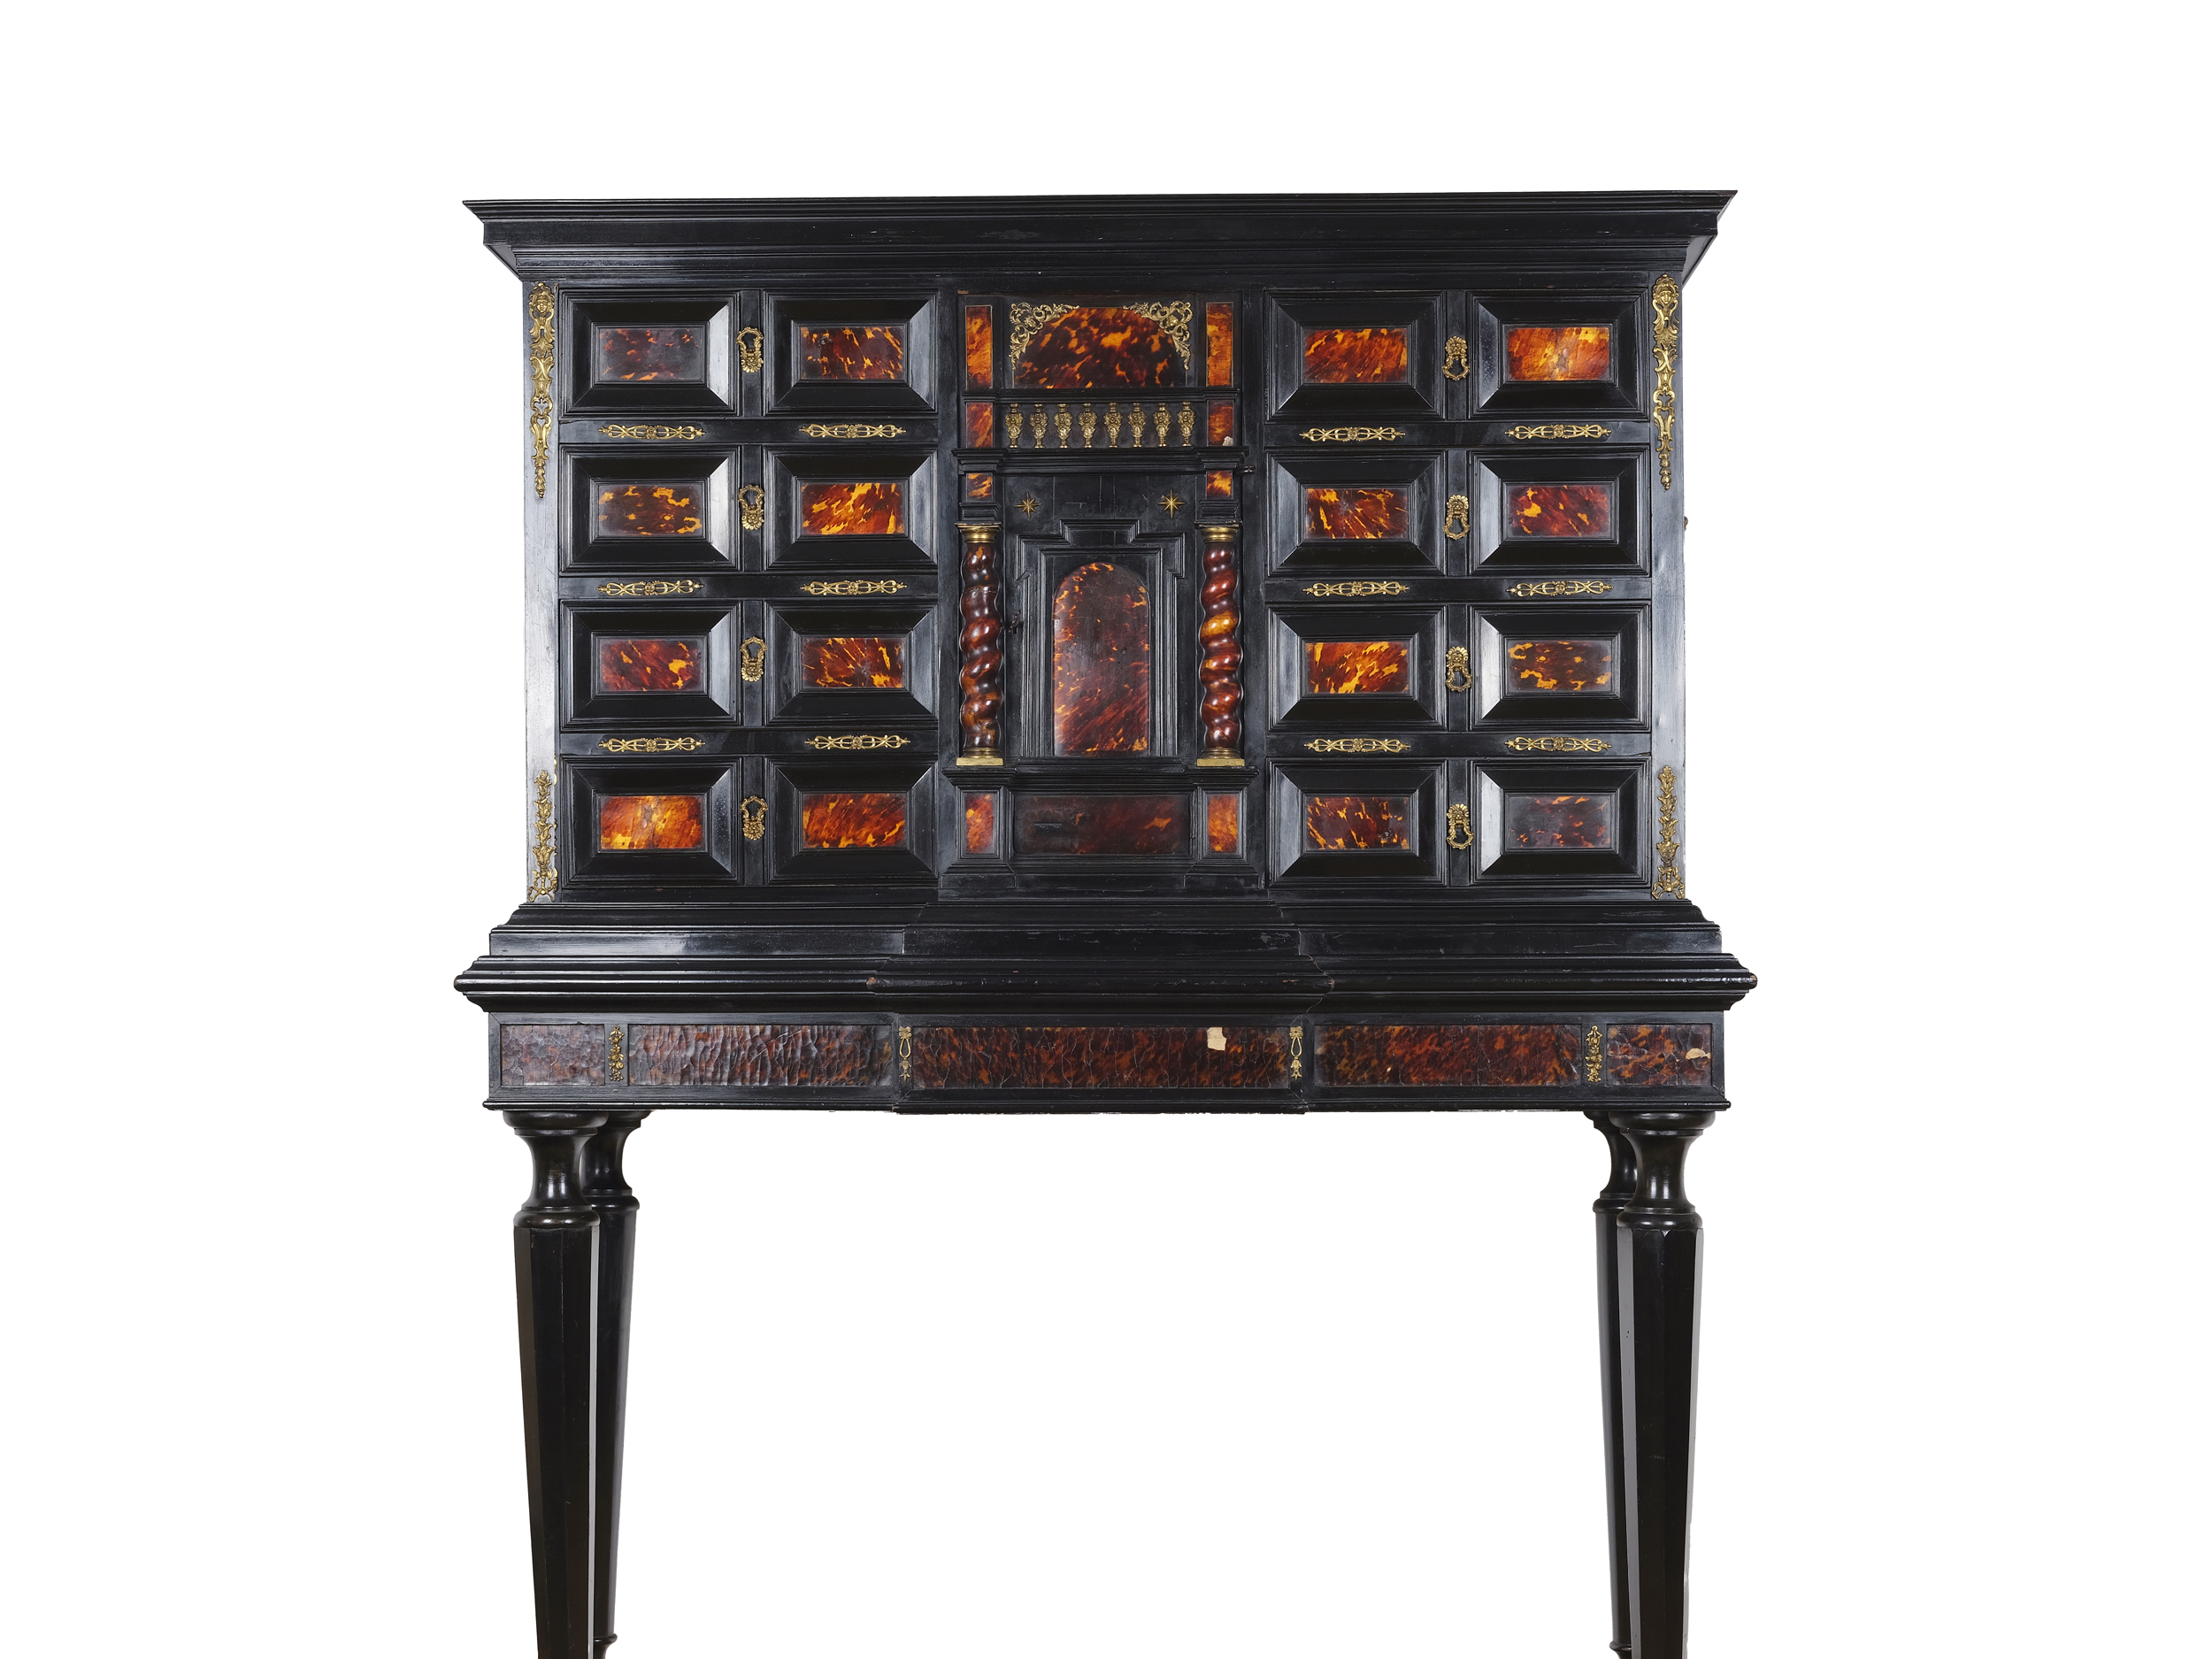 Top cabinet, German or Flemish, in the style of the 17th century - Image 2 of 7